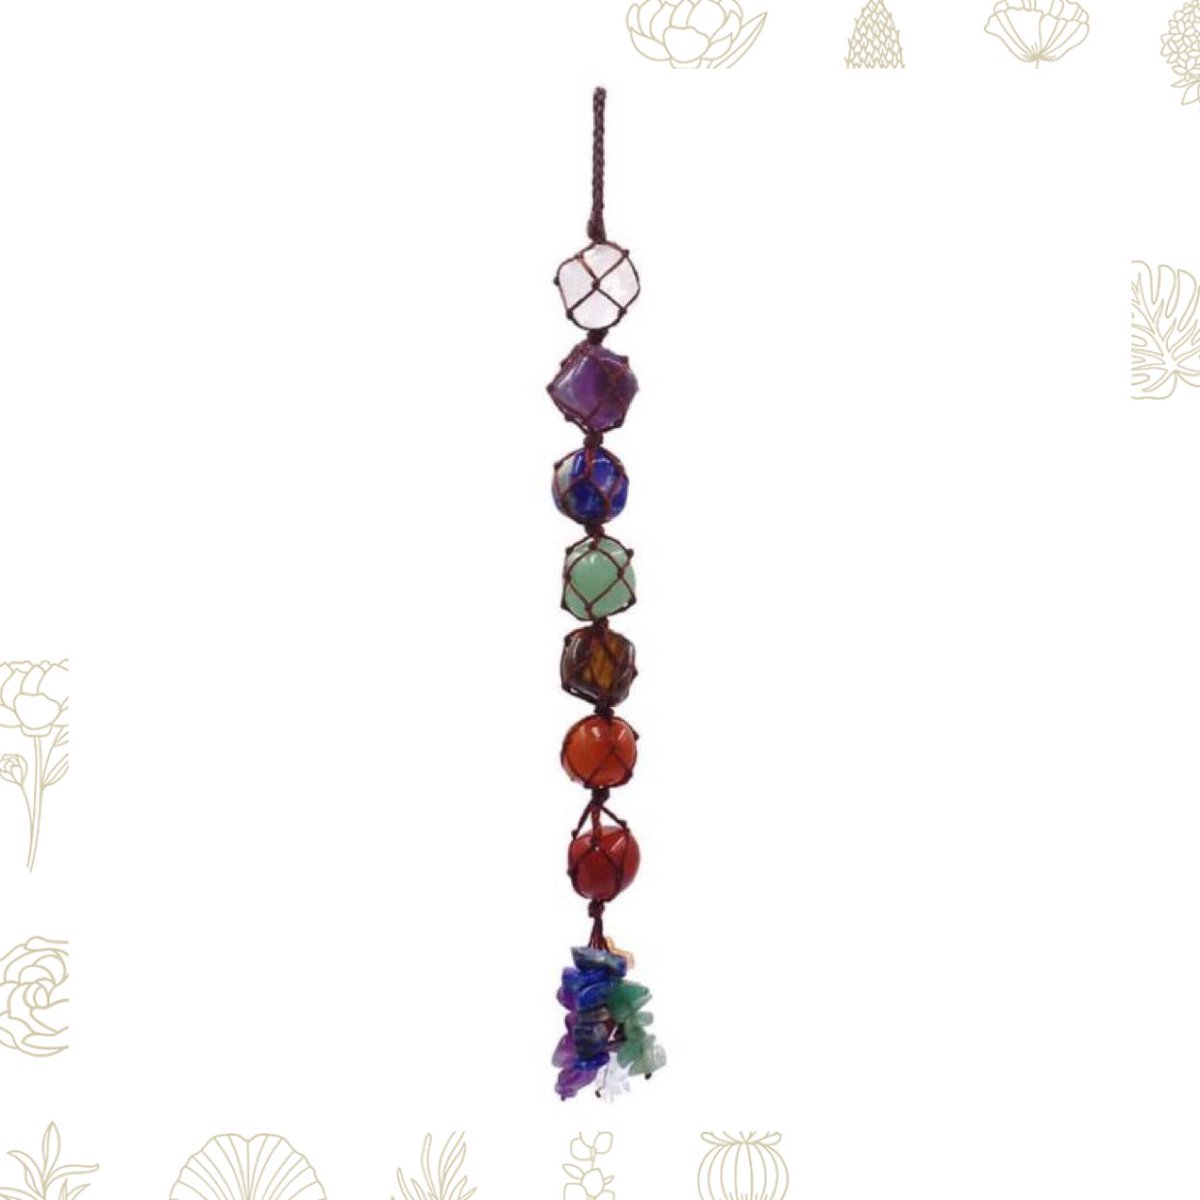 7 Chakra Tumble Car Hanging 

The chakras are the center of energy, located on the body's midline.

Each of the 7 chakras represents a physical, emotional, or mental state, helping to enrich one's spirit and well-being. 

#HealingCrystal #CrystalTumble #7Chakras